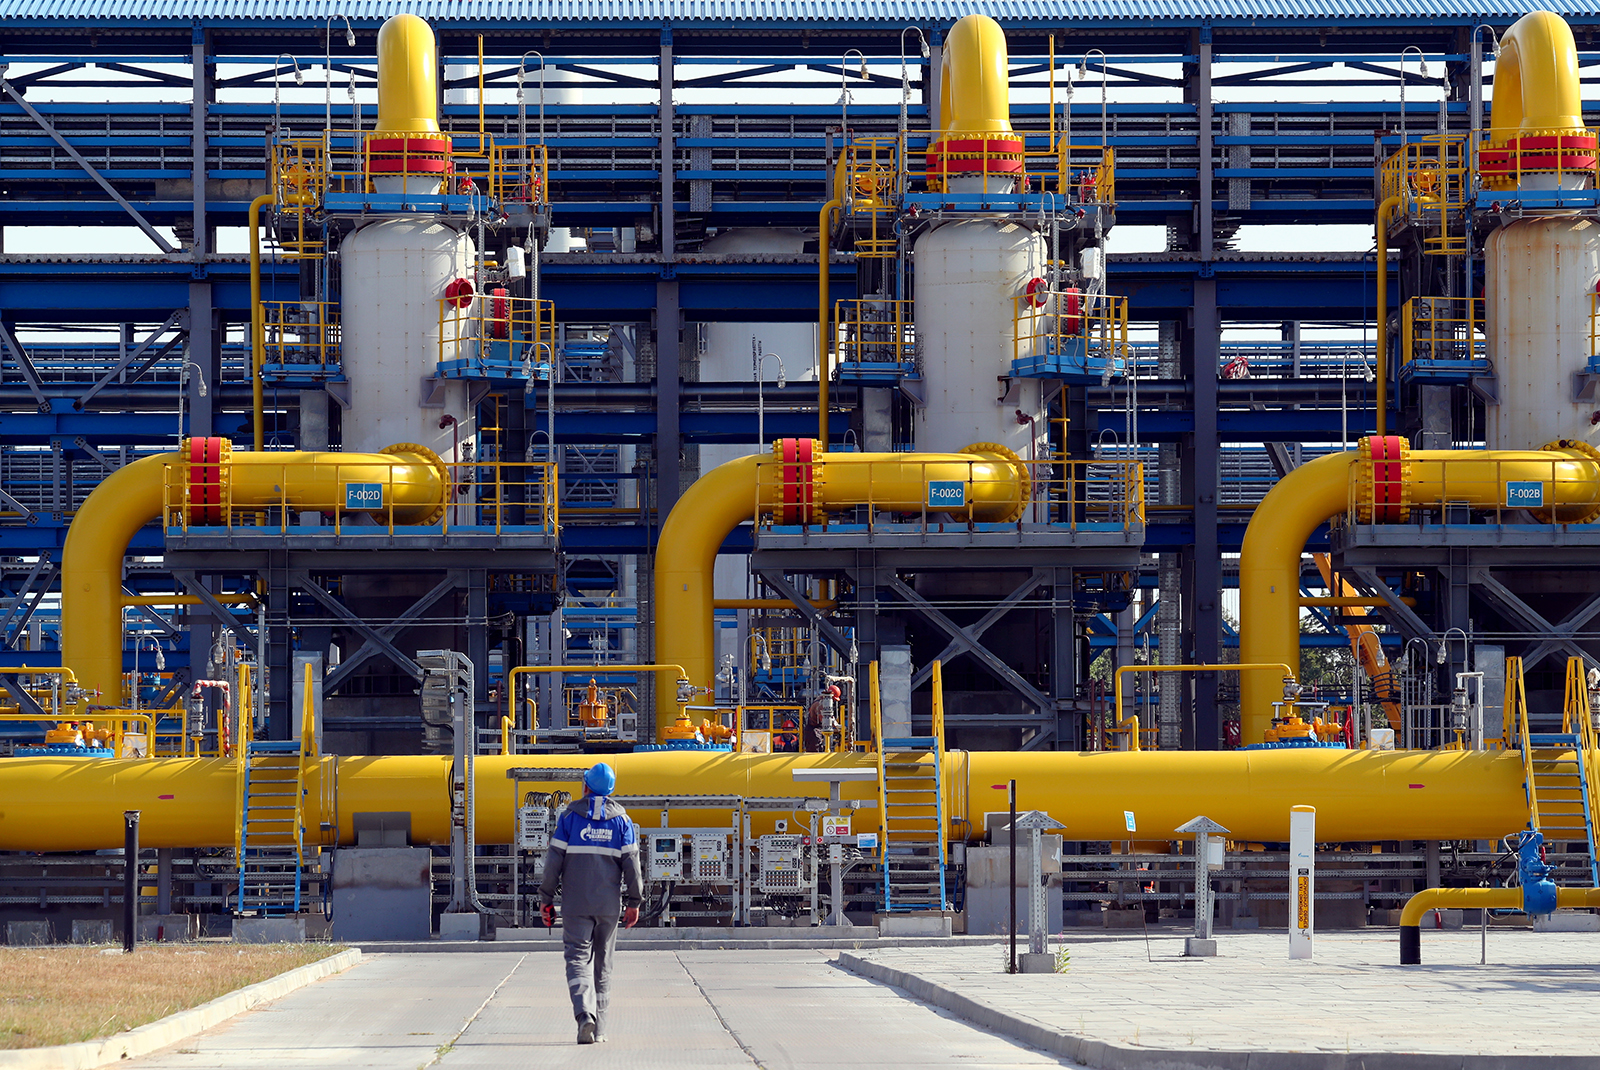 The Slavyanskaya compressor station, operated by Gazprom, is the starting point of the Nord Stream 2 offshore natural gas pipeline located in the Leningrad region, Russia on July 27.